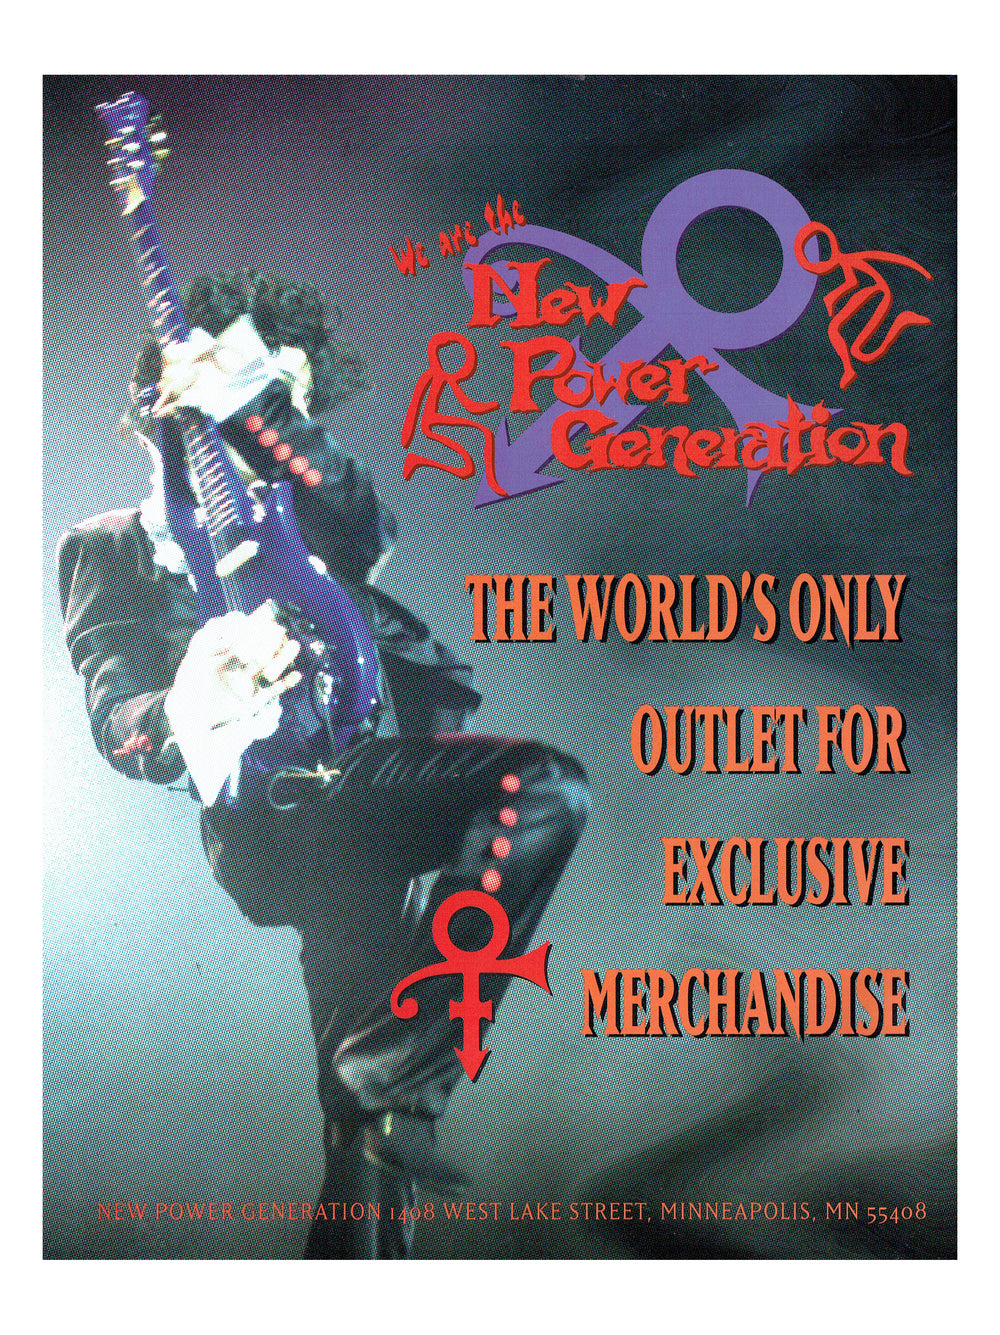 Prince – NPG Magazine Issue Number 1 Official Paisley Park Publication Preloved: